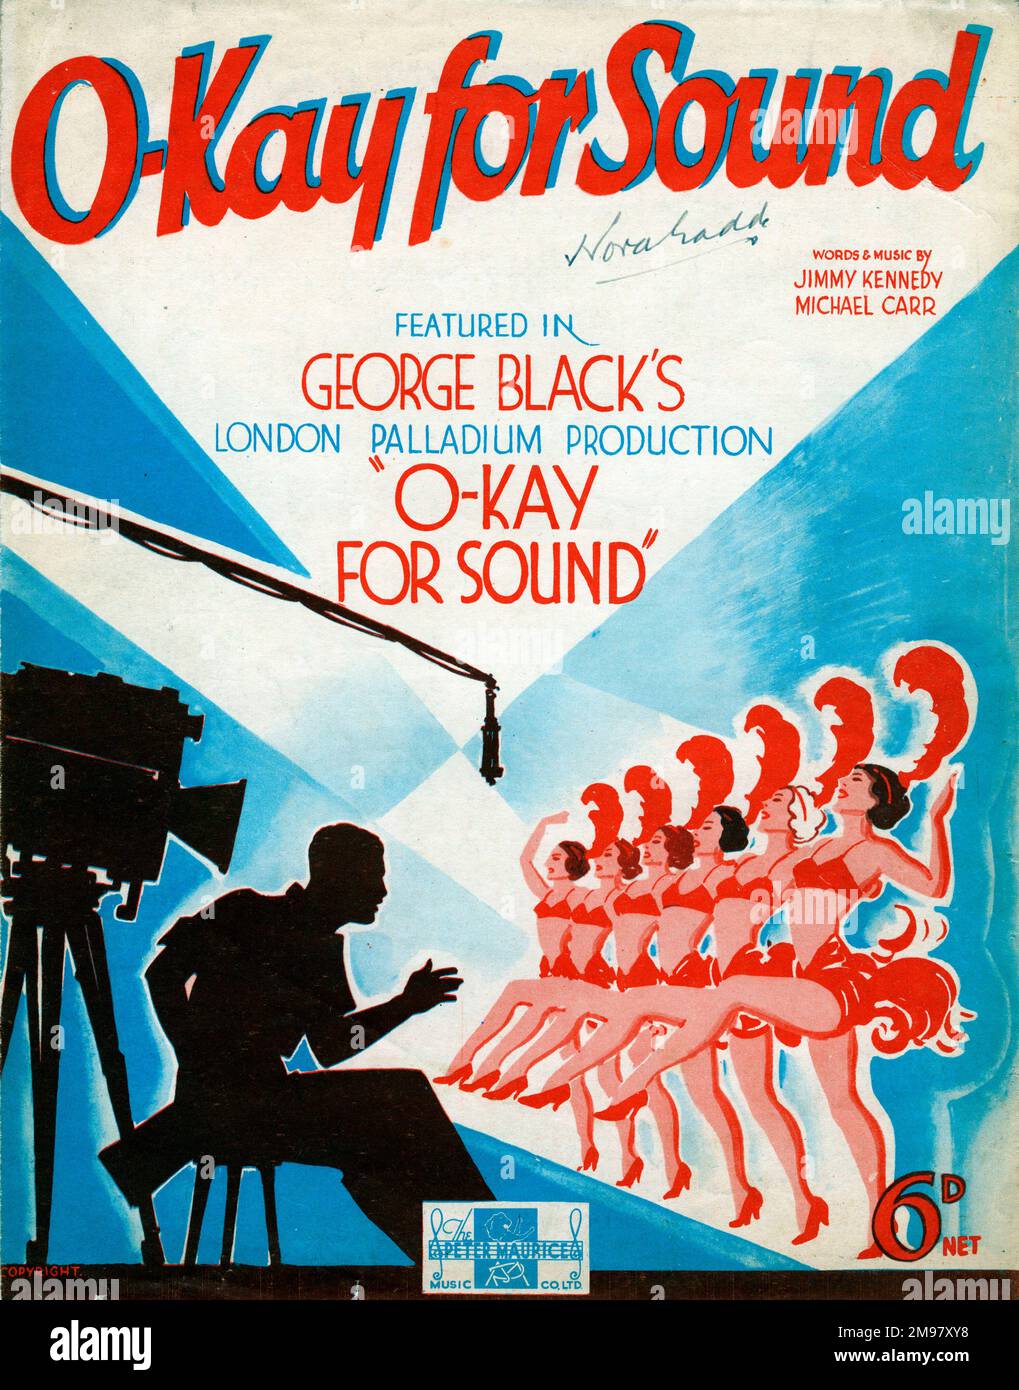 Music cover, O-Kay for Sound, from a London Palladium production by George Black, with words and music by Jimmy Kennedy and Michael Carr. Stock Photo